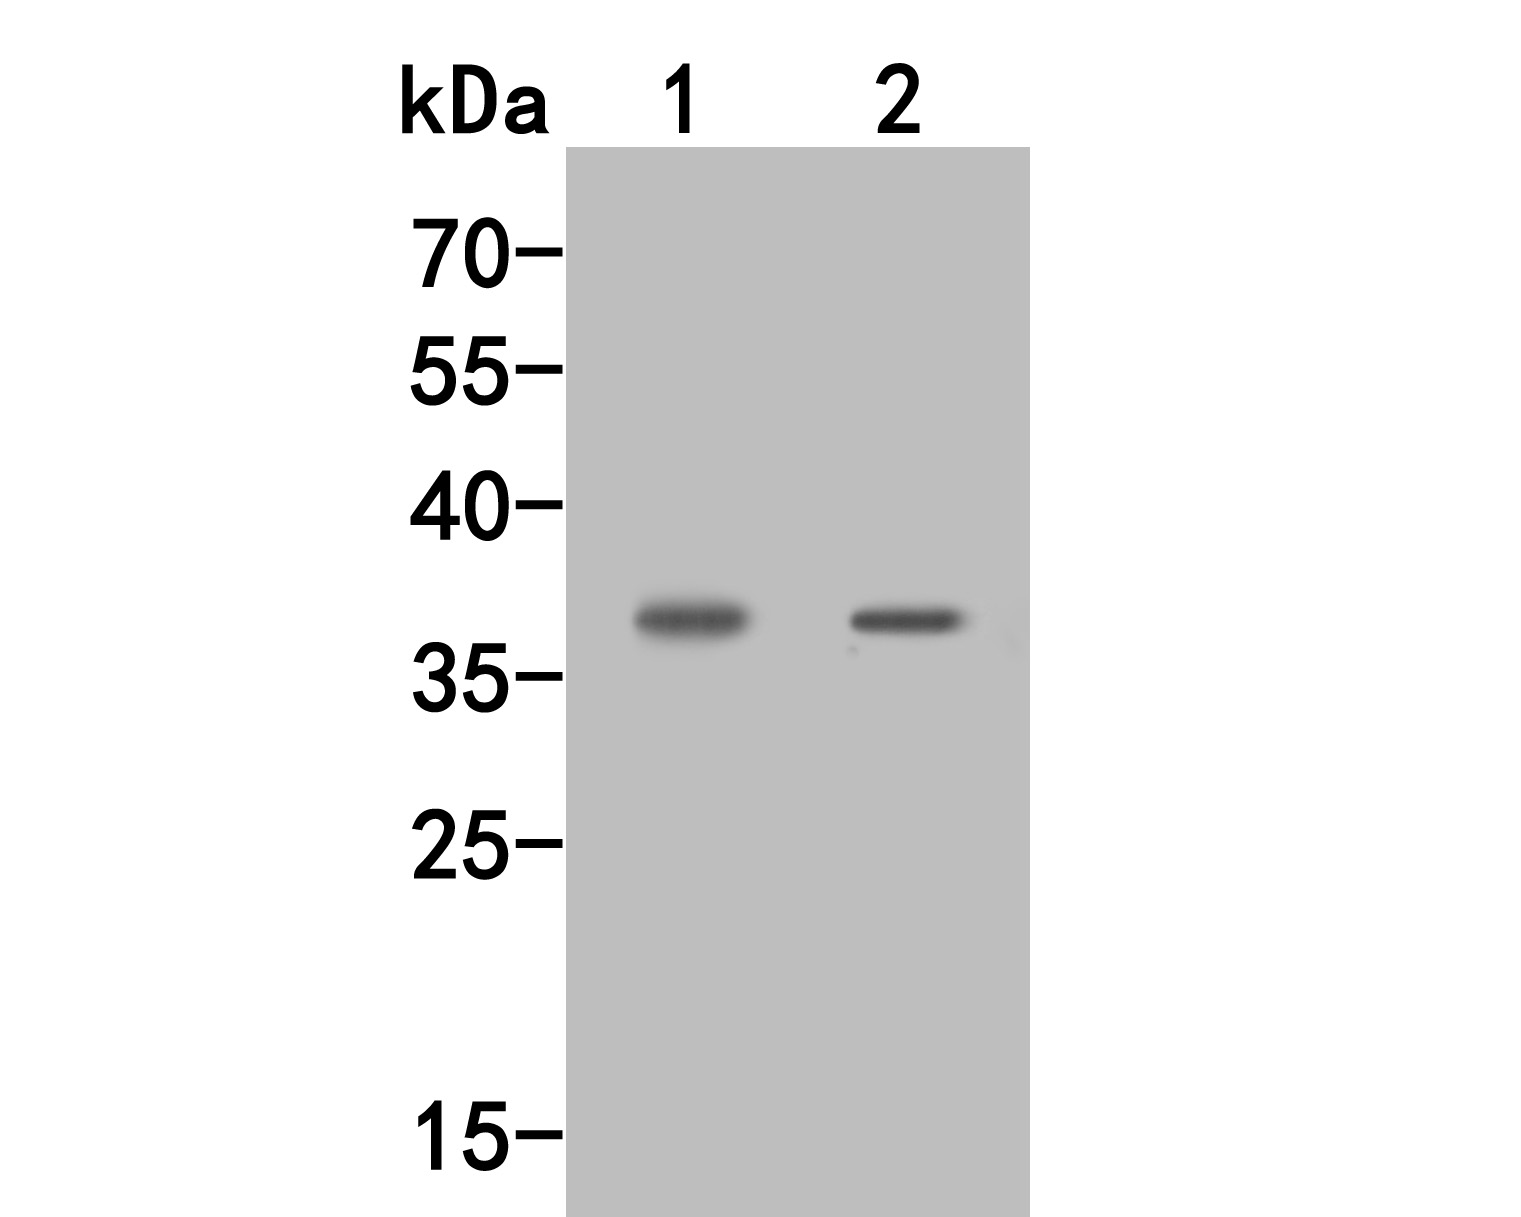 Western blot analysis of IL-2 receptor alpha on different lysates. Proteins were transferred to a PVDF membrane and blocked with 5% BSA in PBS for 1 hour at room temperature. The primary antibody (HA500076, 1/500) was used in 5% BSA at room temperature for 2 hours. Goat Anti-Rabbit IgG - HRP Secondary Antibody (HA1001) at 1:5,000 dilution was used for 1 hour at room temperature.<br />
Positive control: <br />
Lane 1: Human kidney tissue lysate<br />
Lane 2: Rat spleen tissue lysate